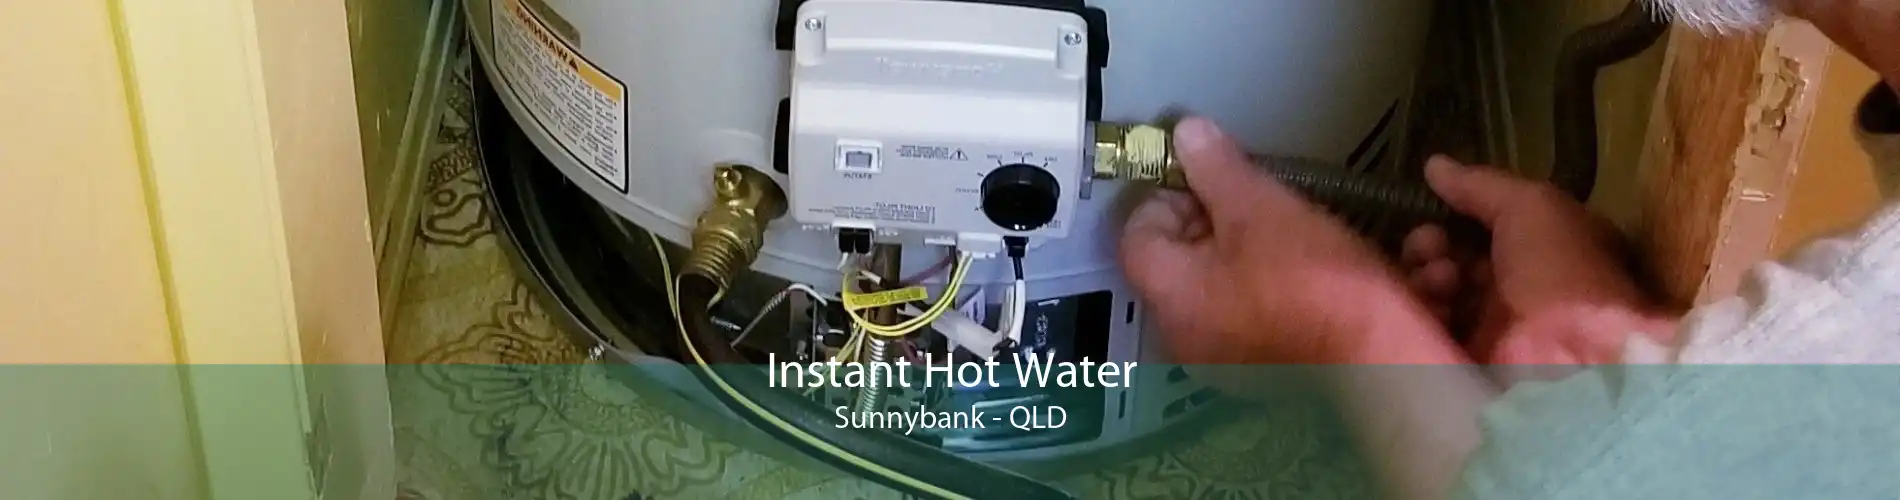 Instant Hot Water Sunnybank - QLD